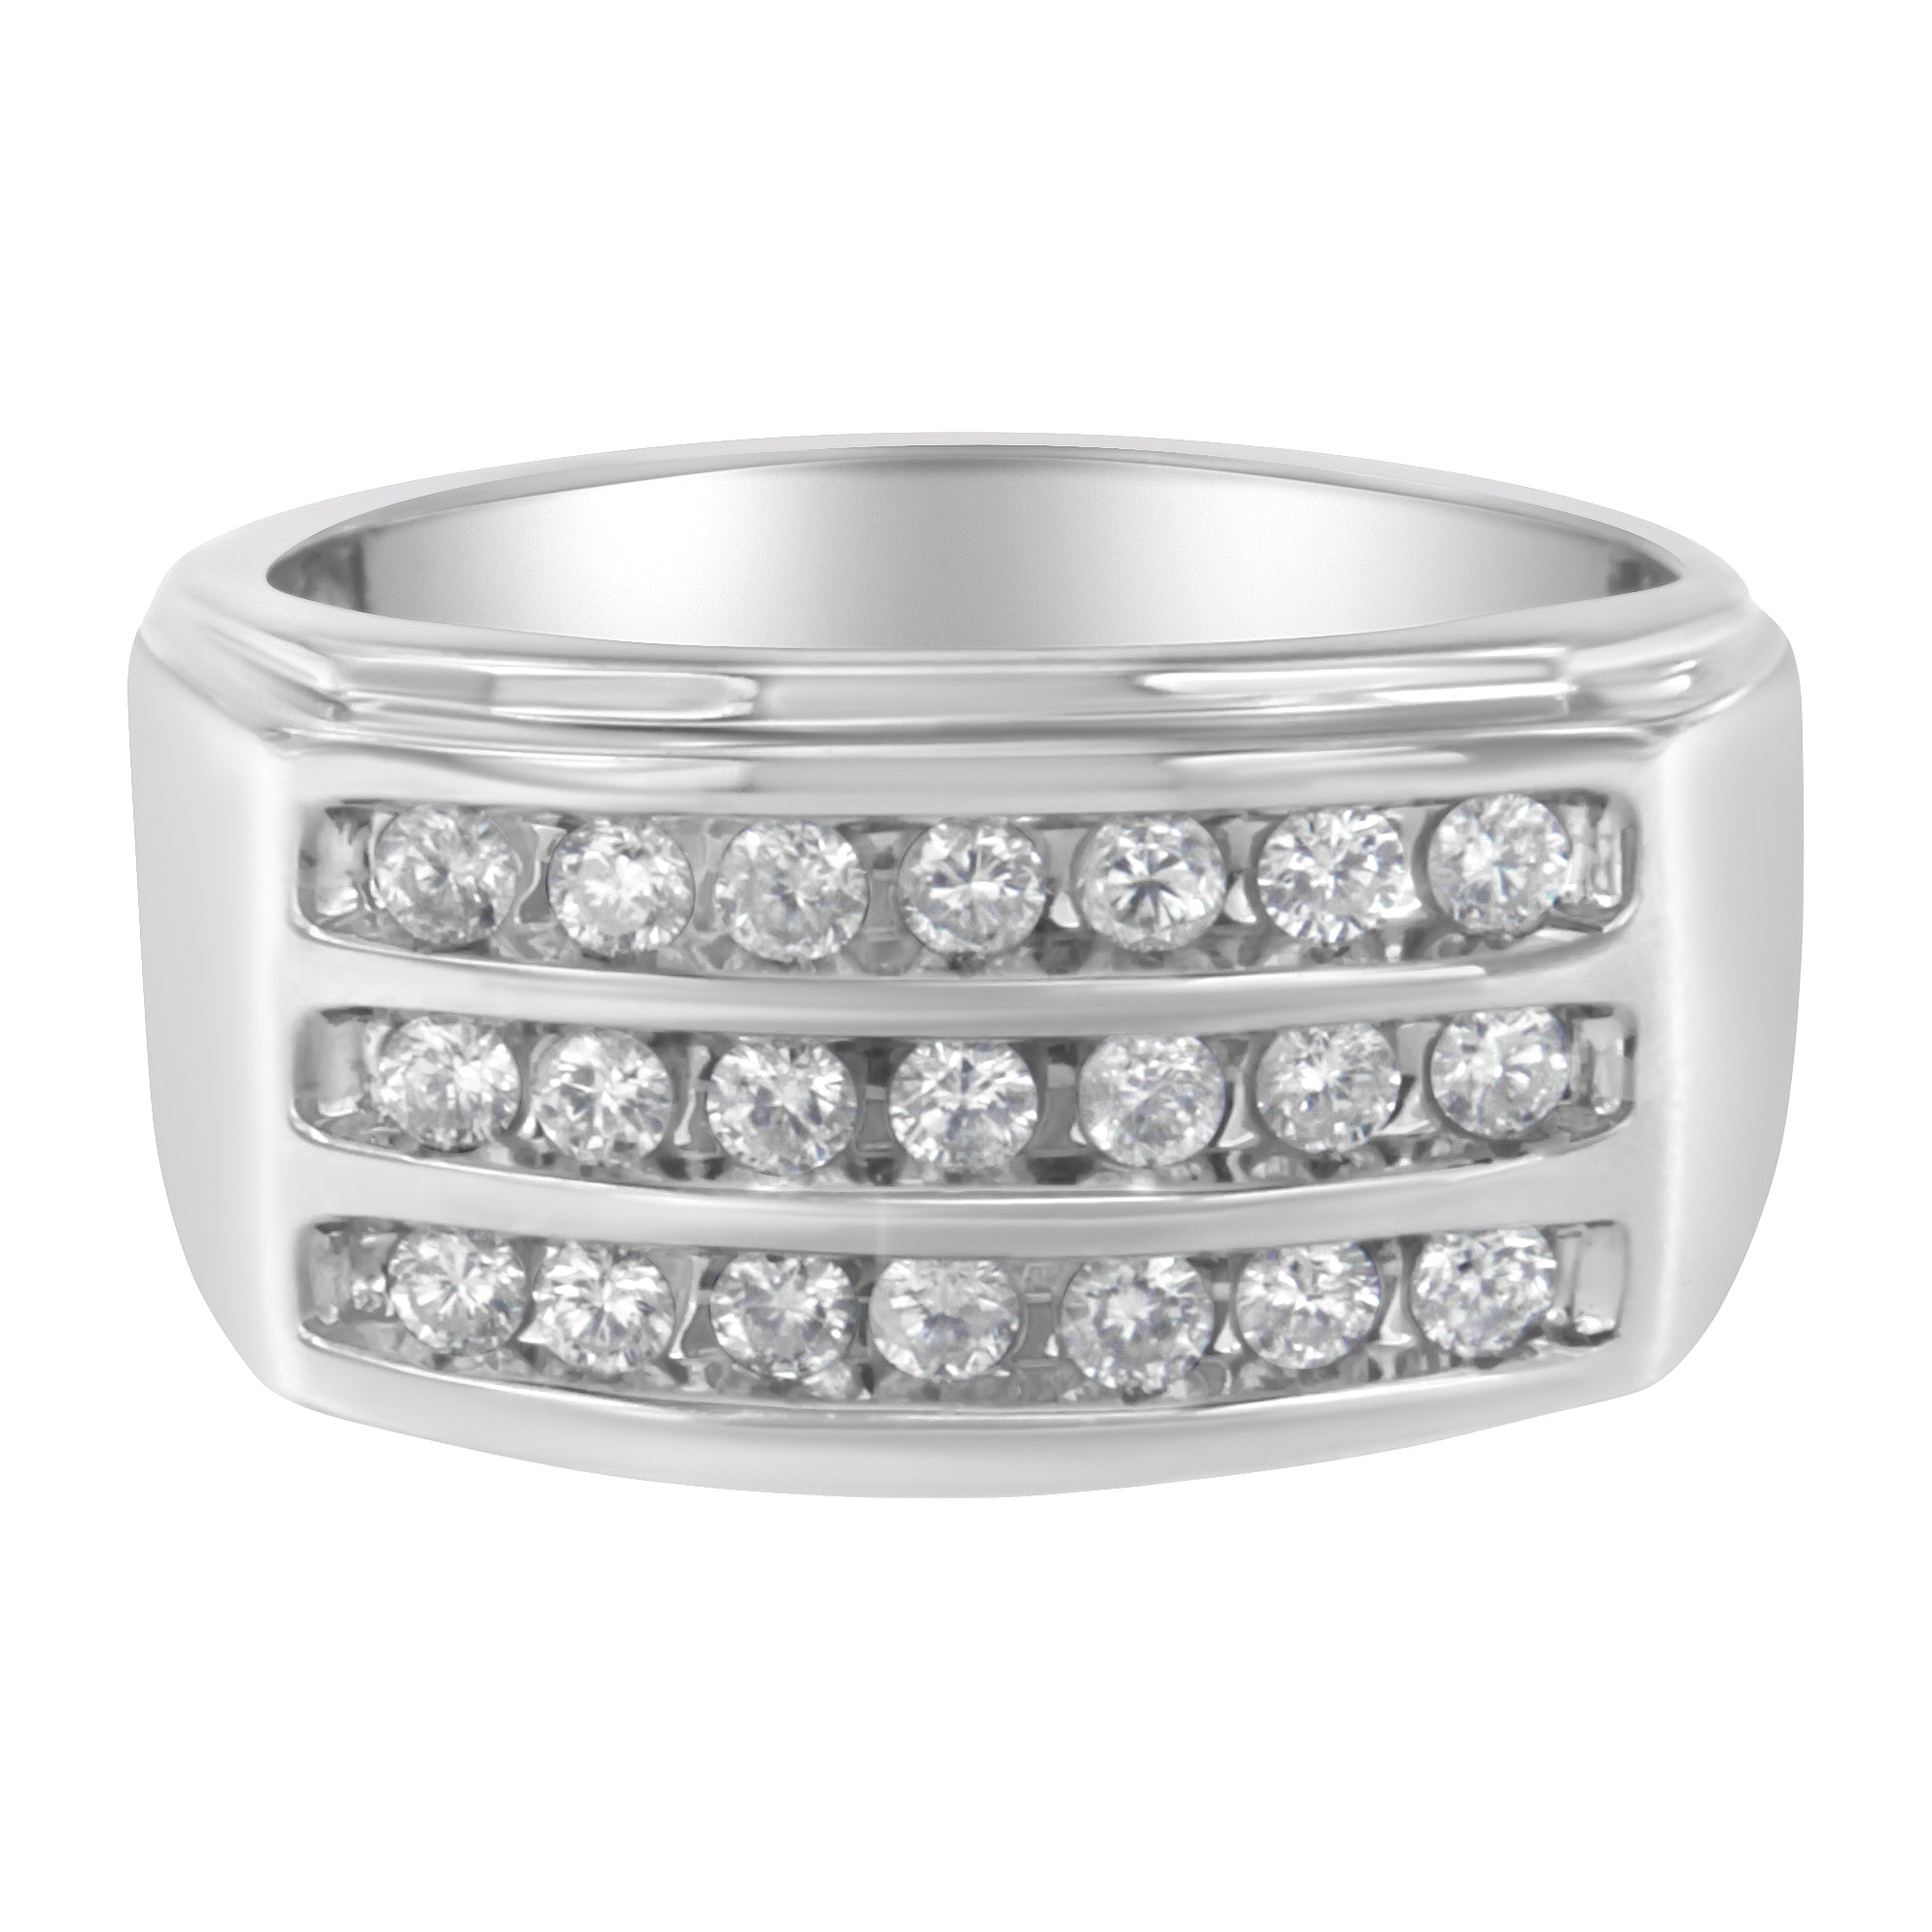 14K White Gold Men's Diamond Channel Set Band Ring (1 cttw, H-I Color, SI2-I1 Clarity) - LinkagejewelrydesignLinkagejewelrydesign